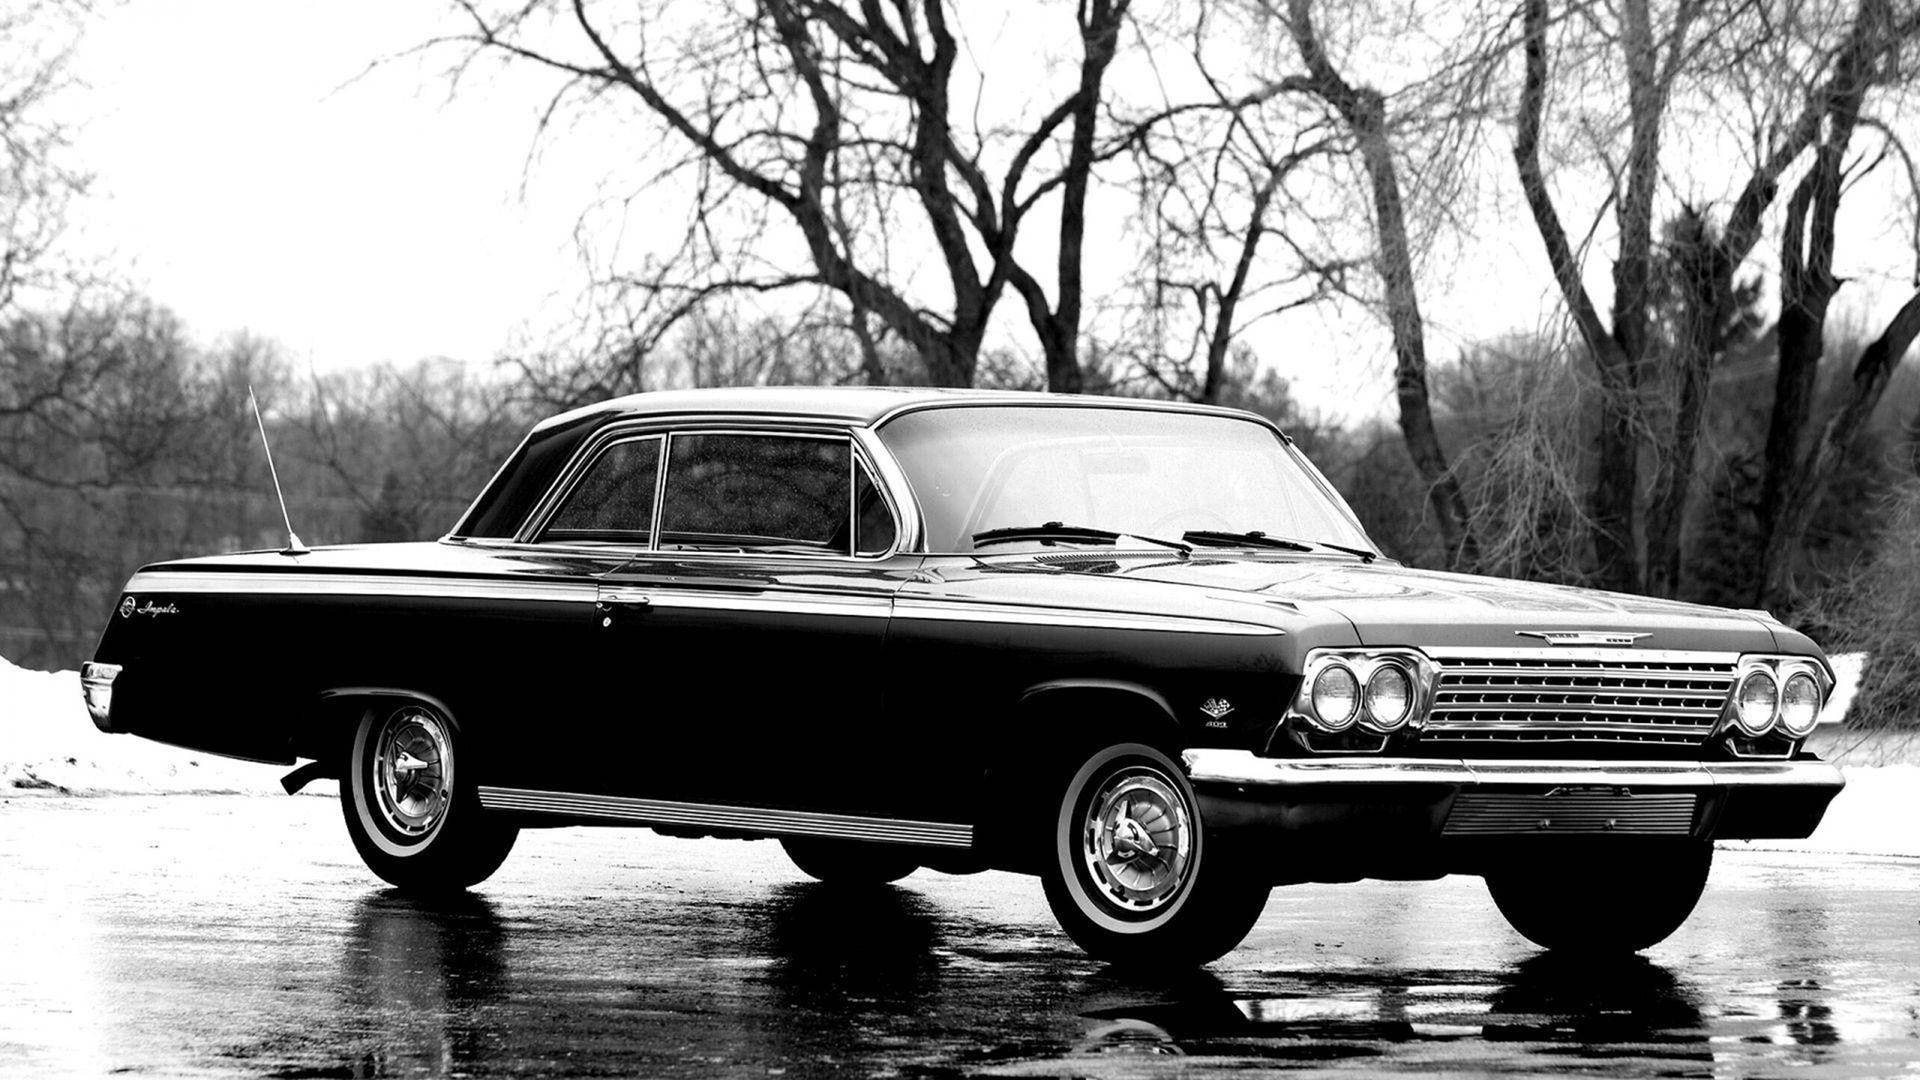 Chevrolet Impala 1967 In Winter Background